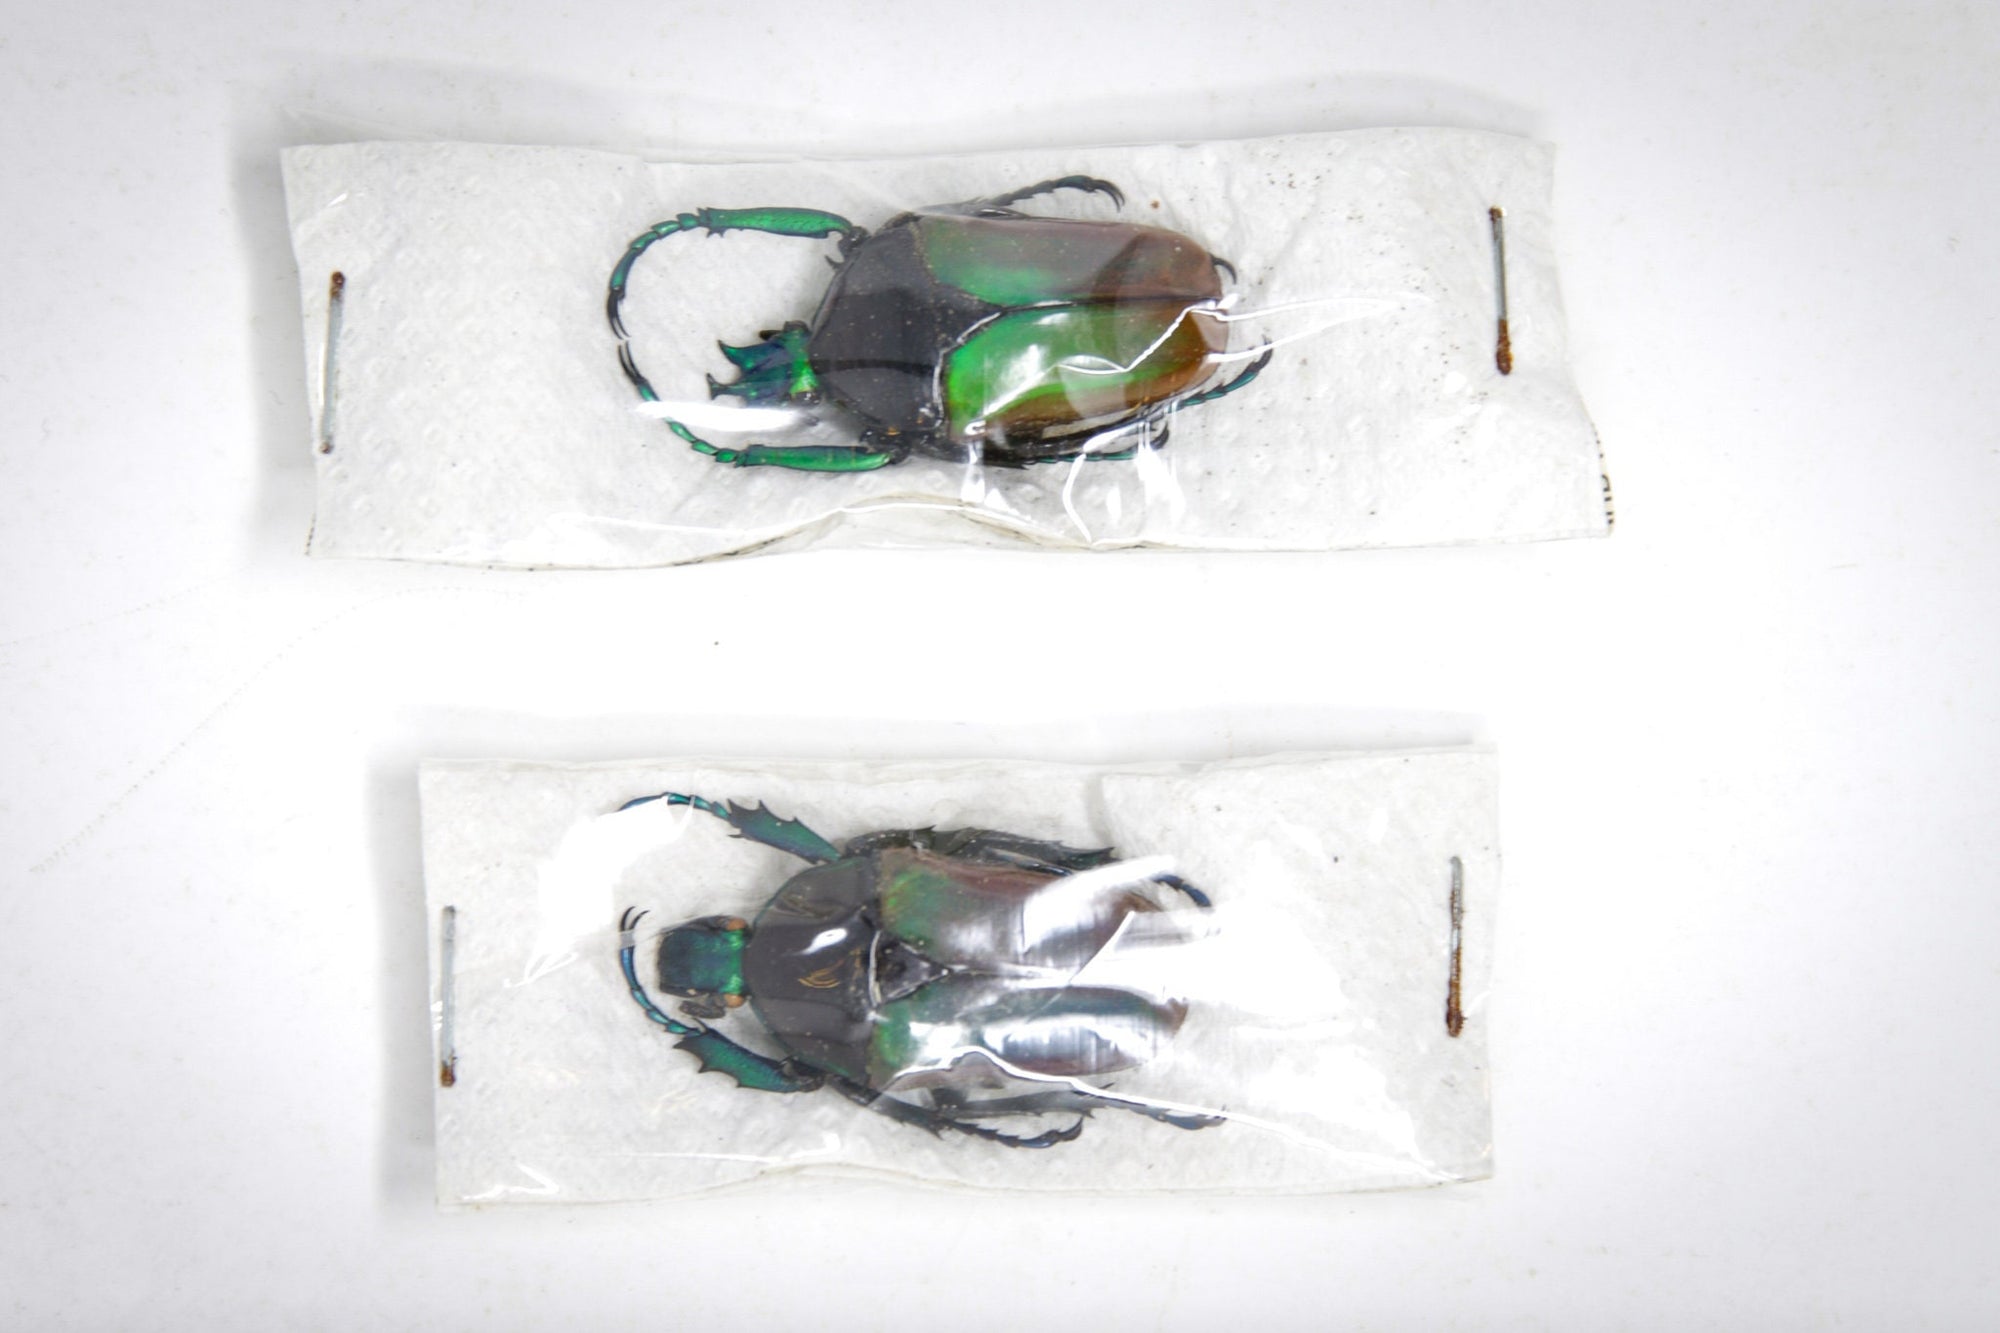 Pair (2) Neptunidae polyhorus manowensis, Unmounted Beetle Specimens with Scientific Collection Data, A1 Quality